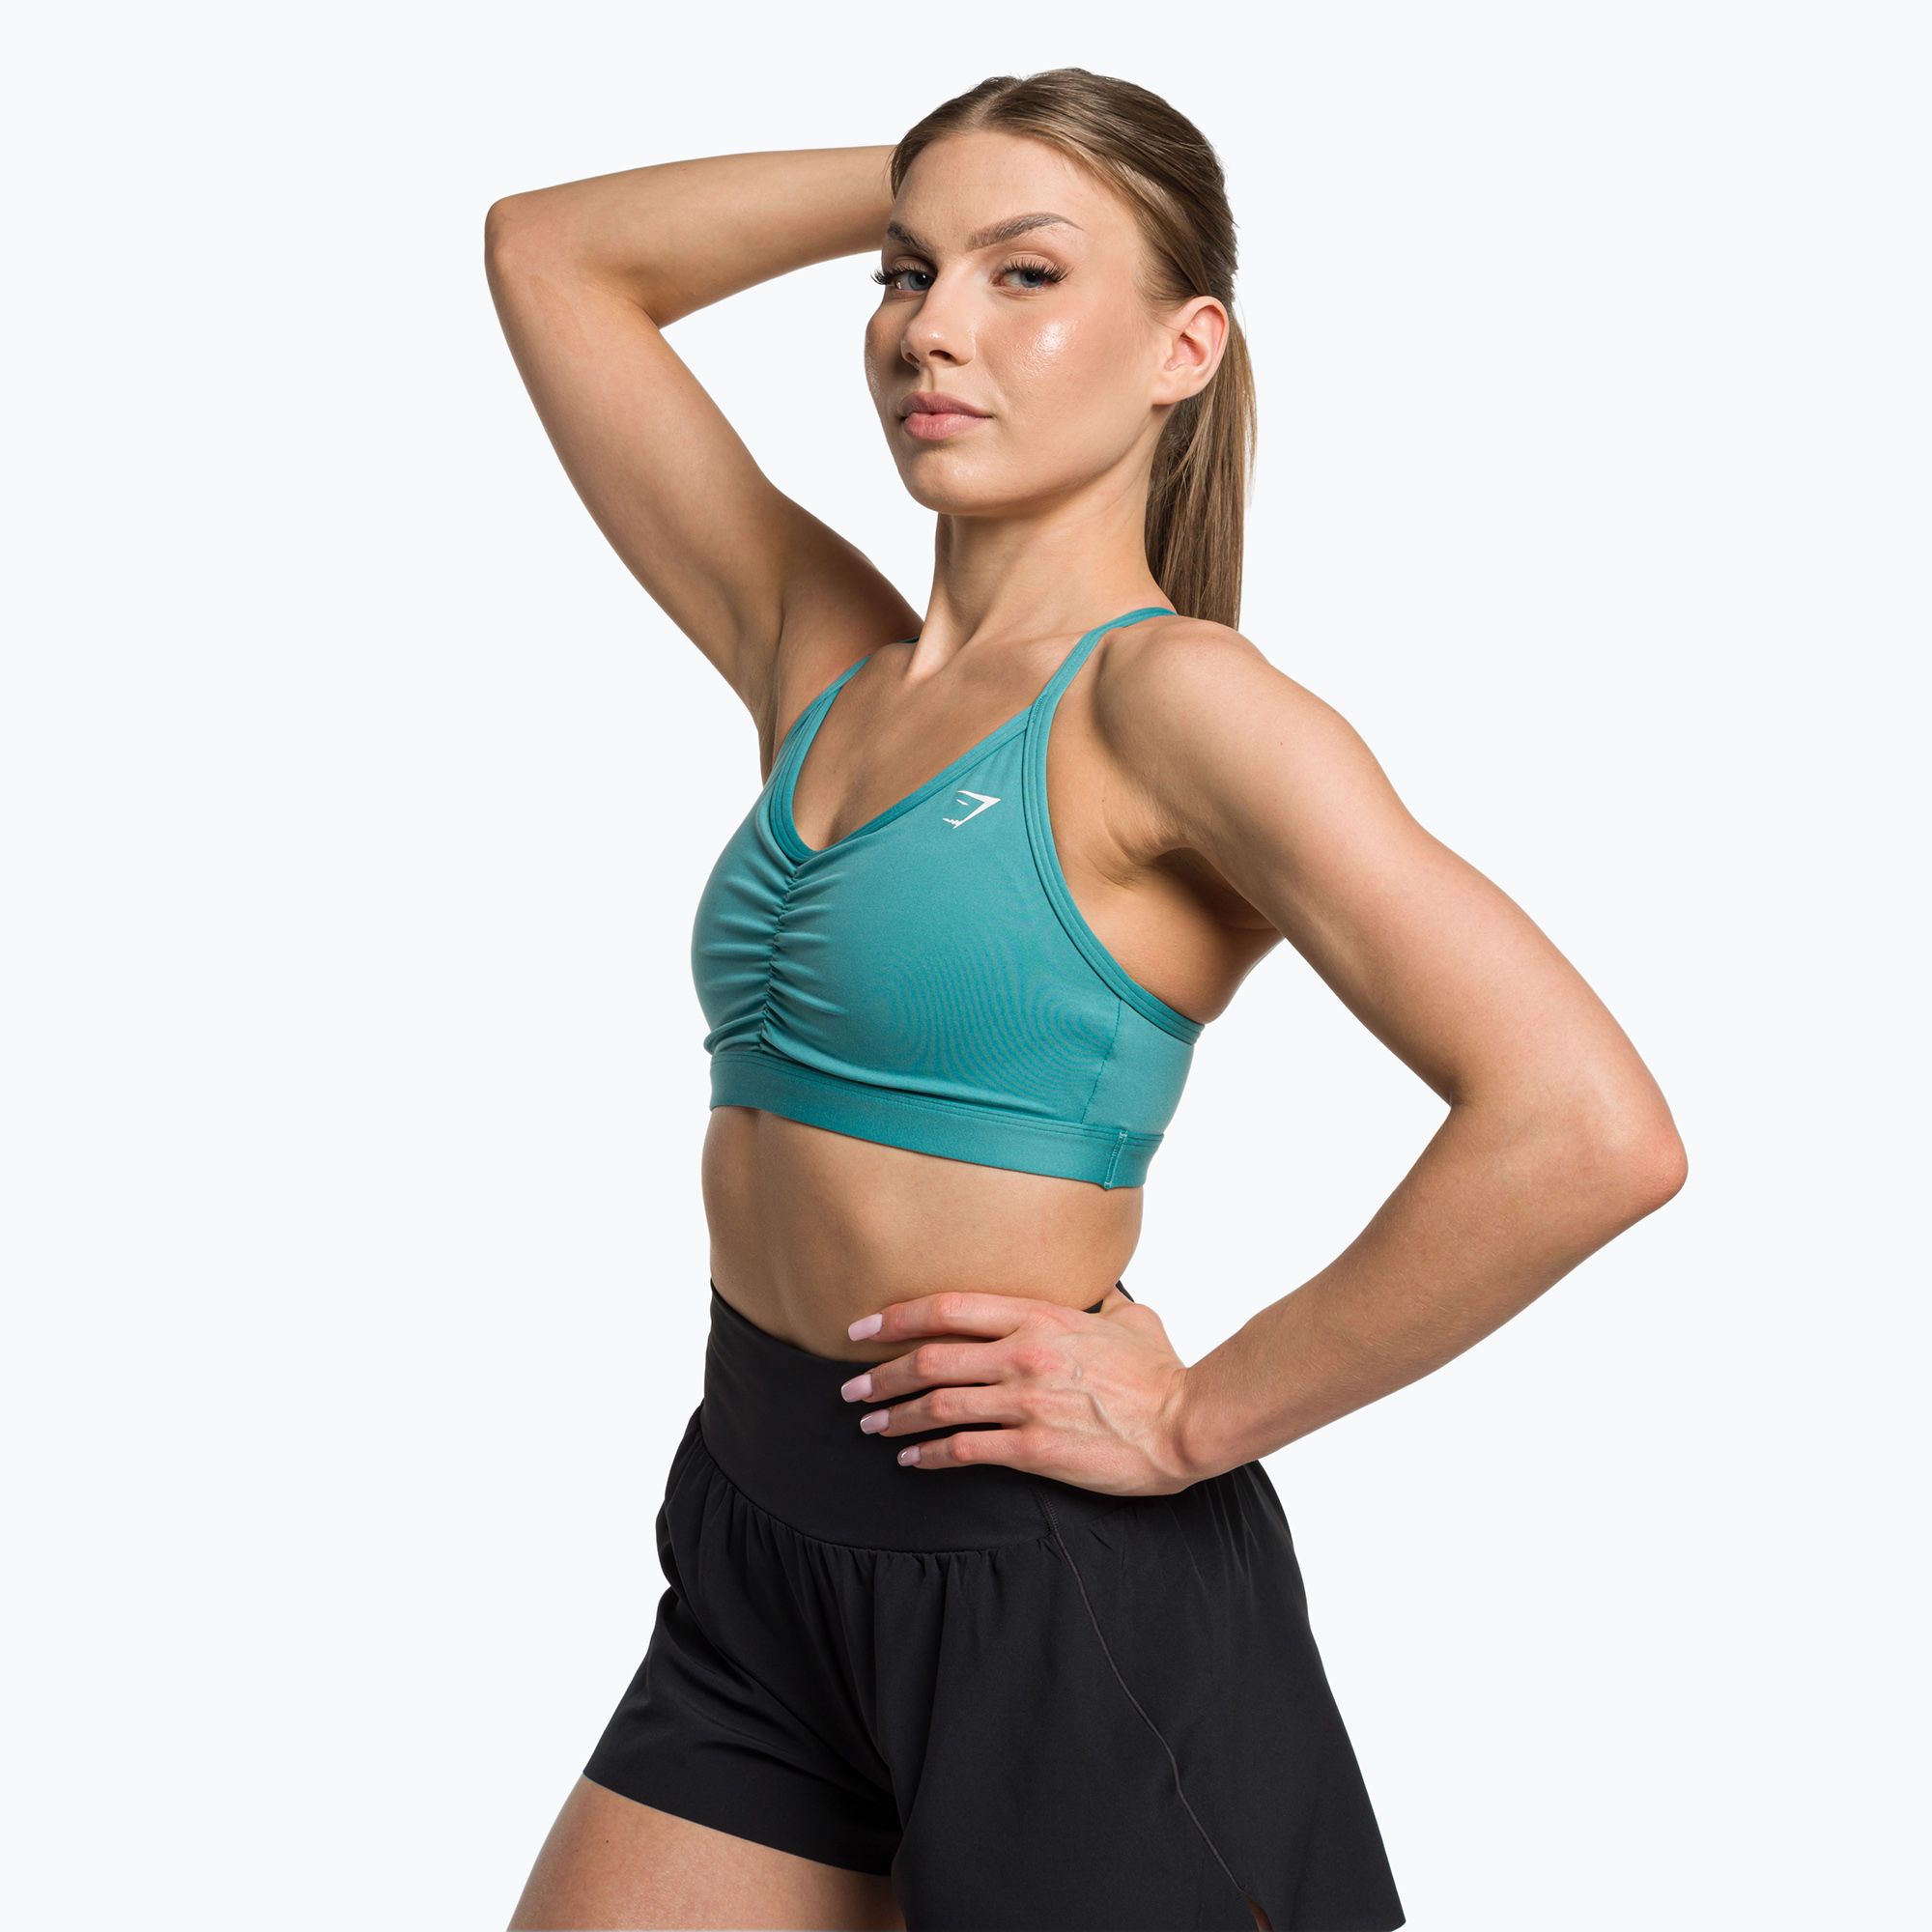 Gymshark Ruched Training Sports fauna teal fitness bra 